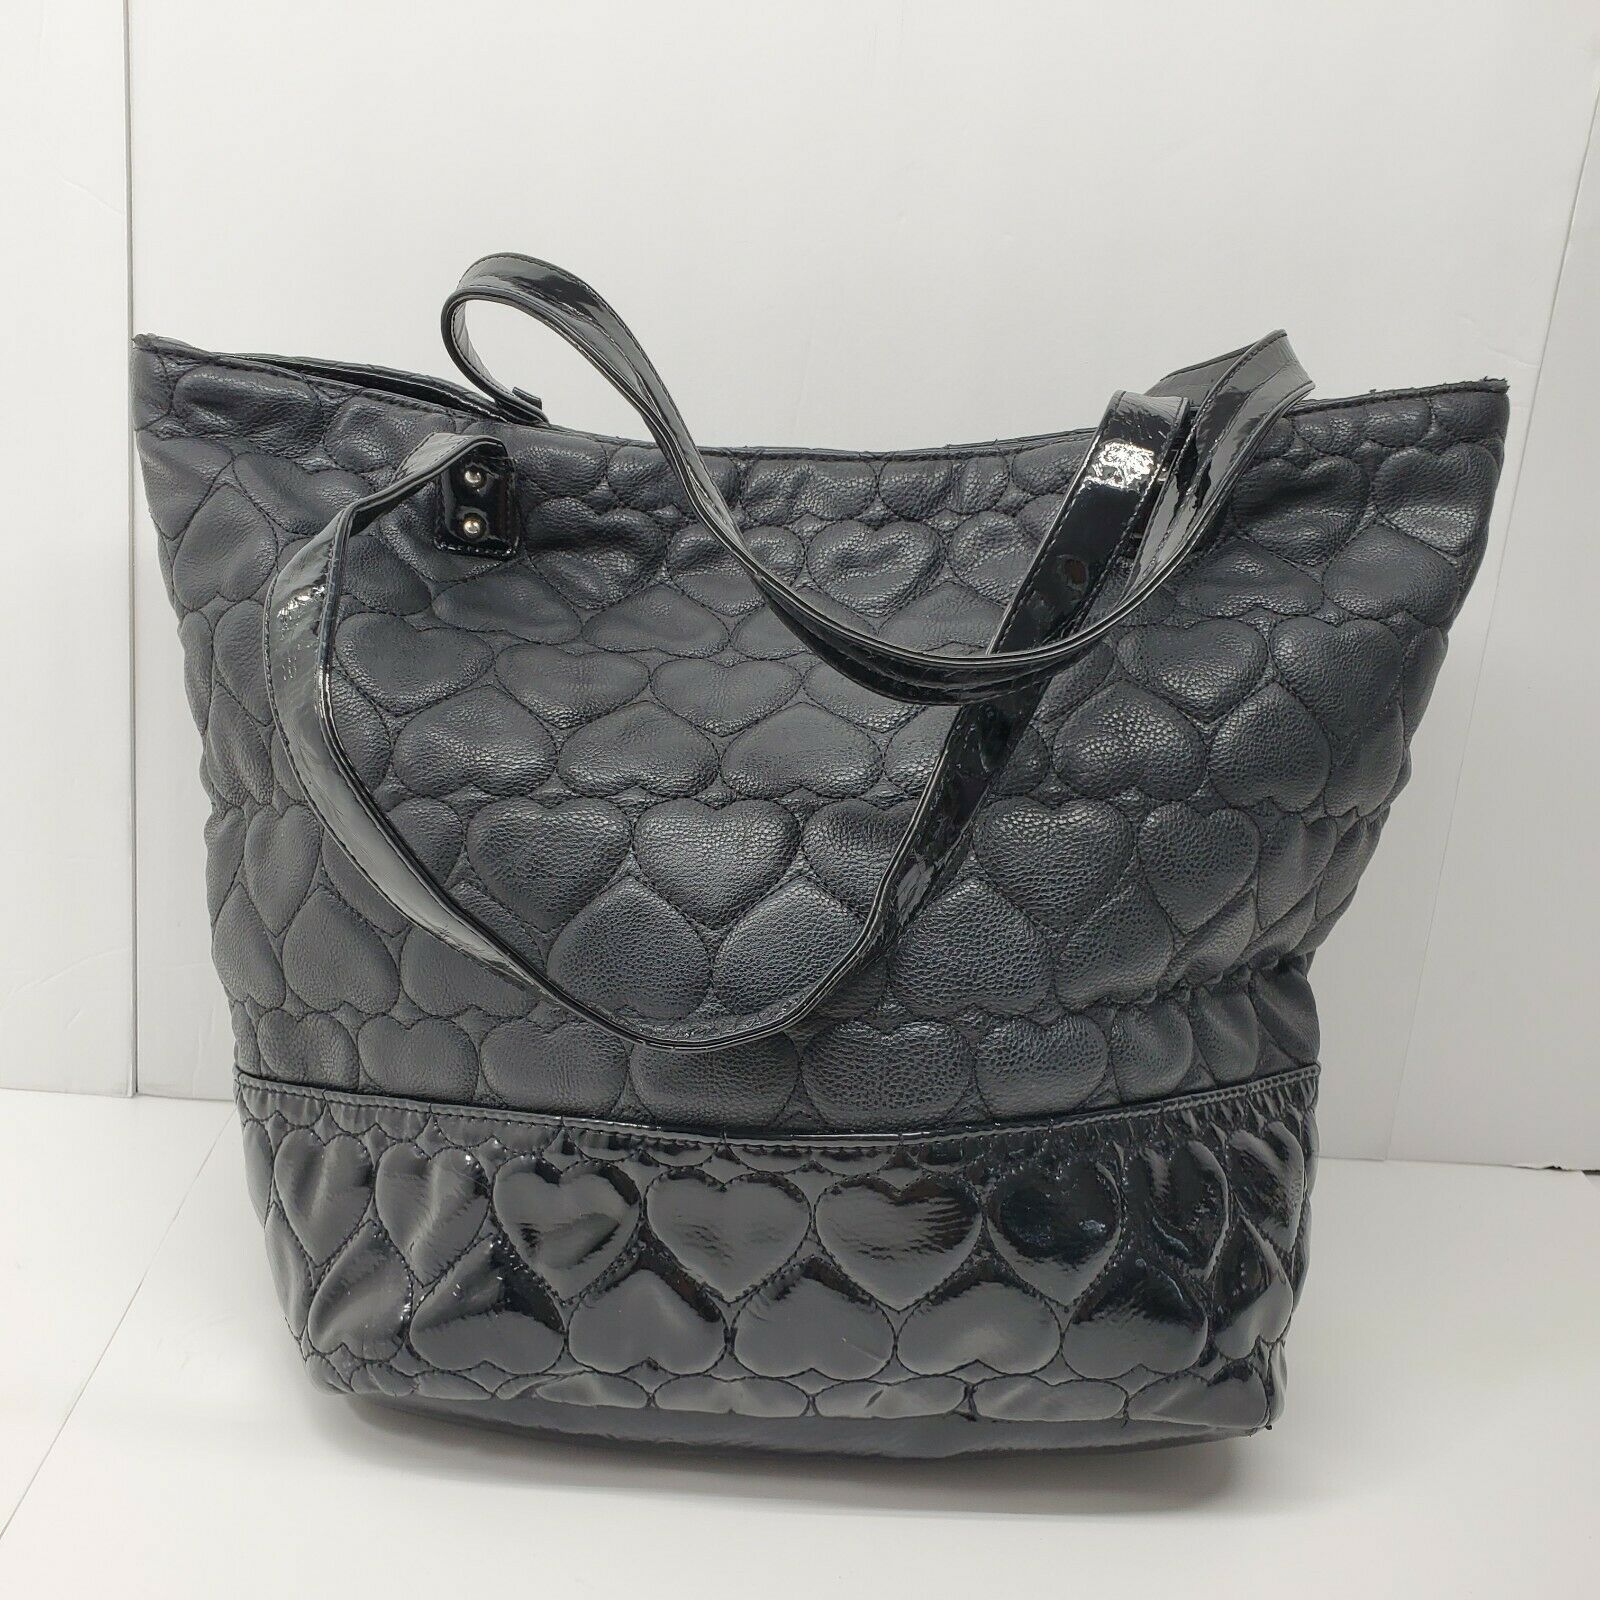 Betsey Johnson Quilted Heart Tote Bag Purse Shopper Black Faux Leather ...